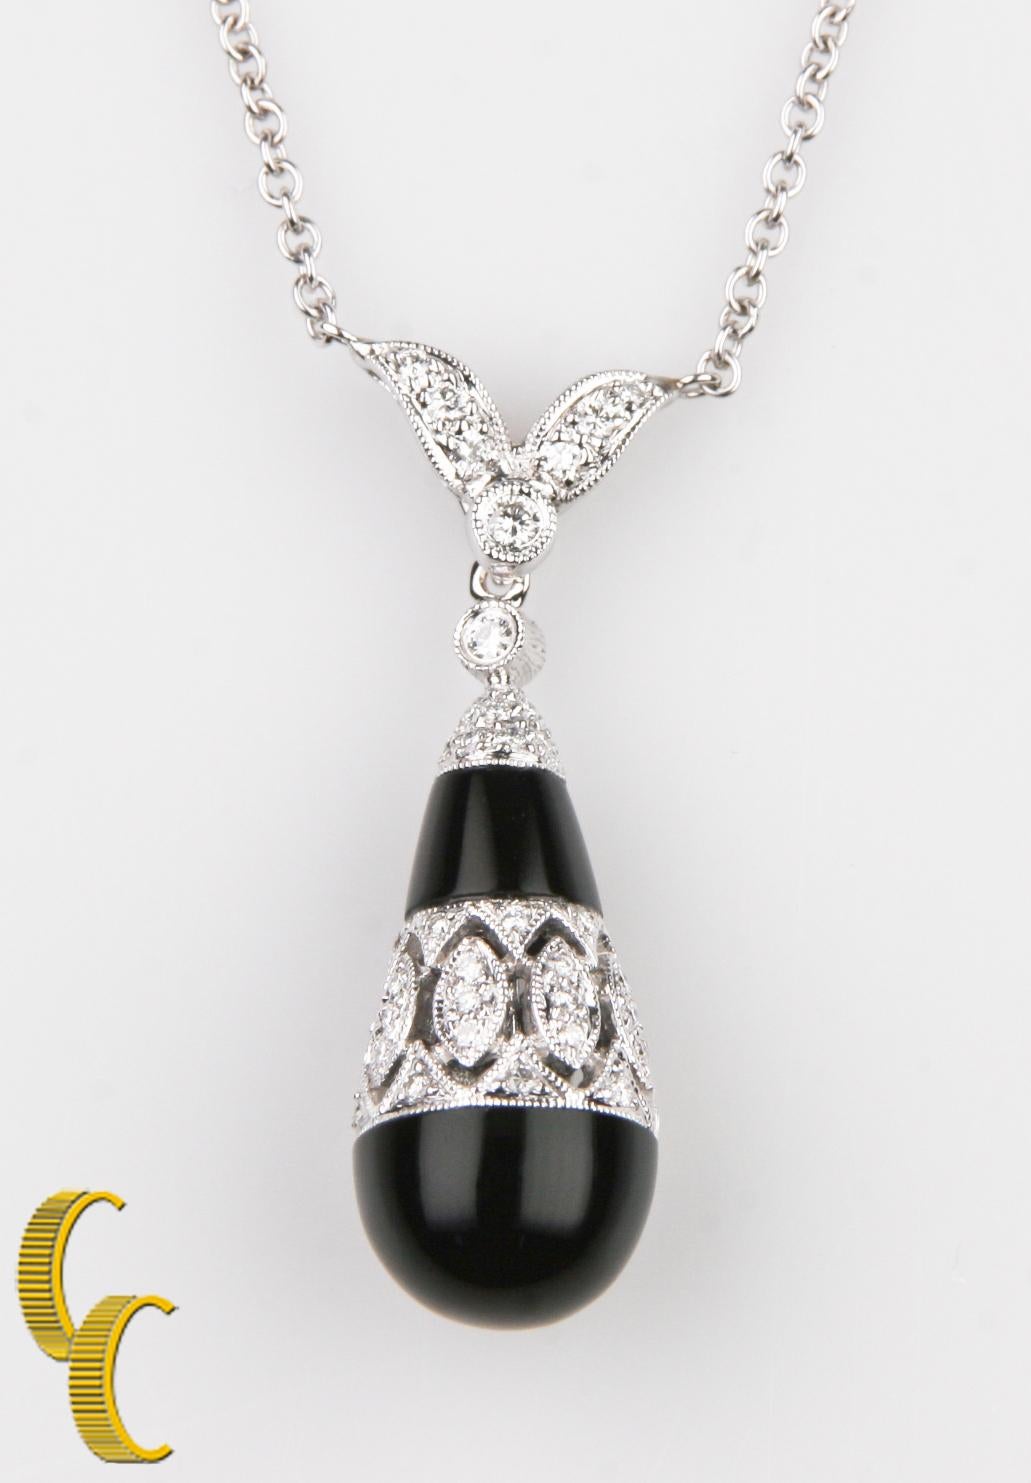 the pendant features a layered onyx & diamond dangle, completed by a diamond set floral motif bail
the pendant is supported by a sixteen inch 18k white gold designer style chain, terminating in a lobster claw clasp
bright and patterned finish with